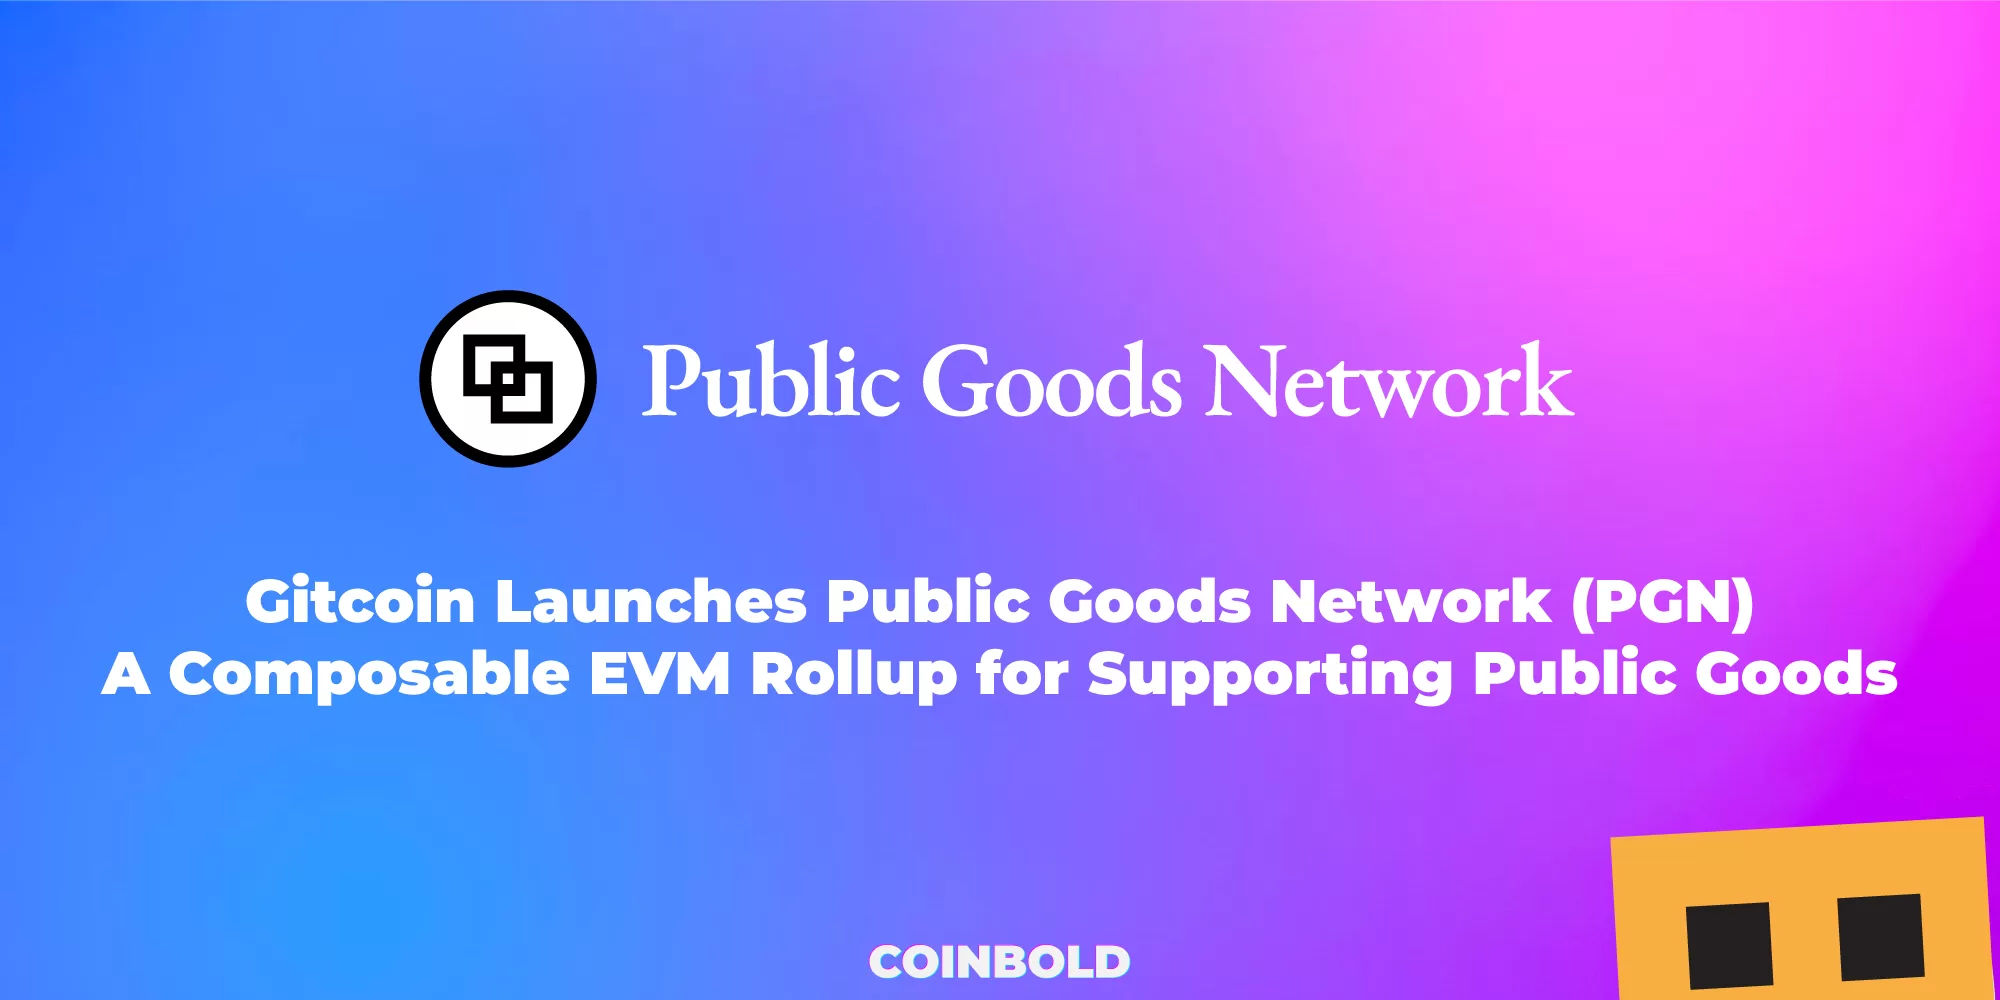 Gitcoin Launches Public Goods Network (PGN) - A Composable EVM Rollup for Supporting Public Goods